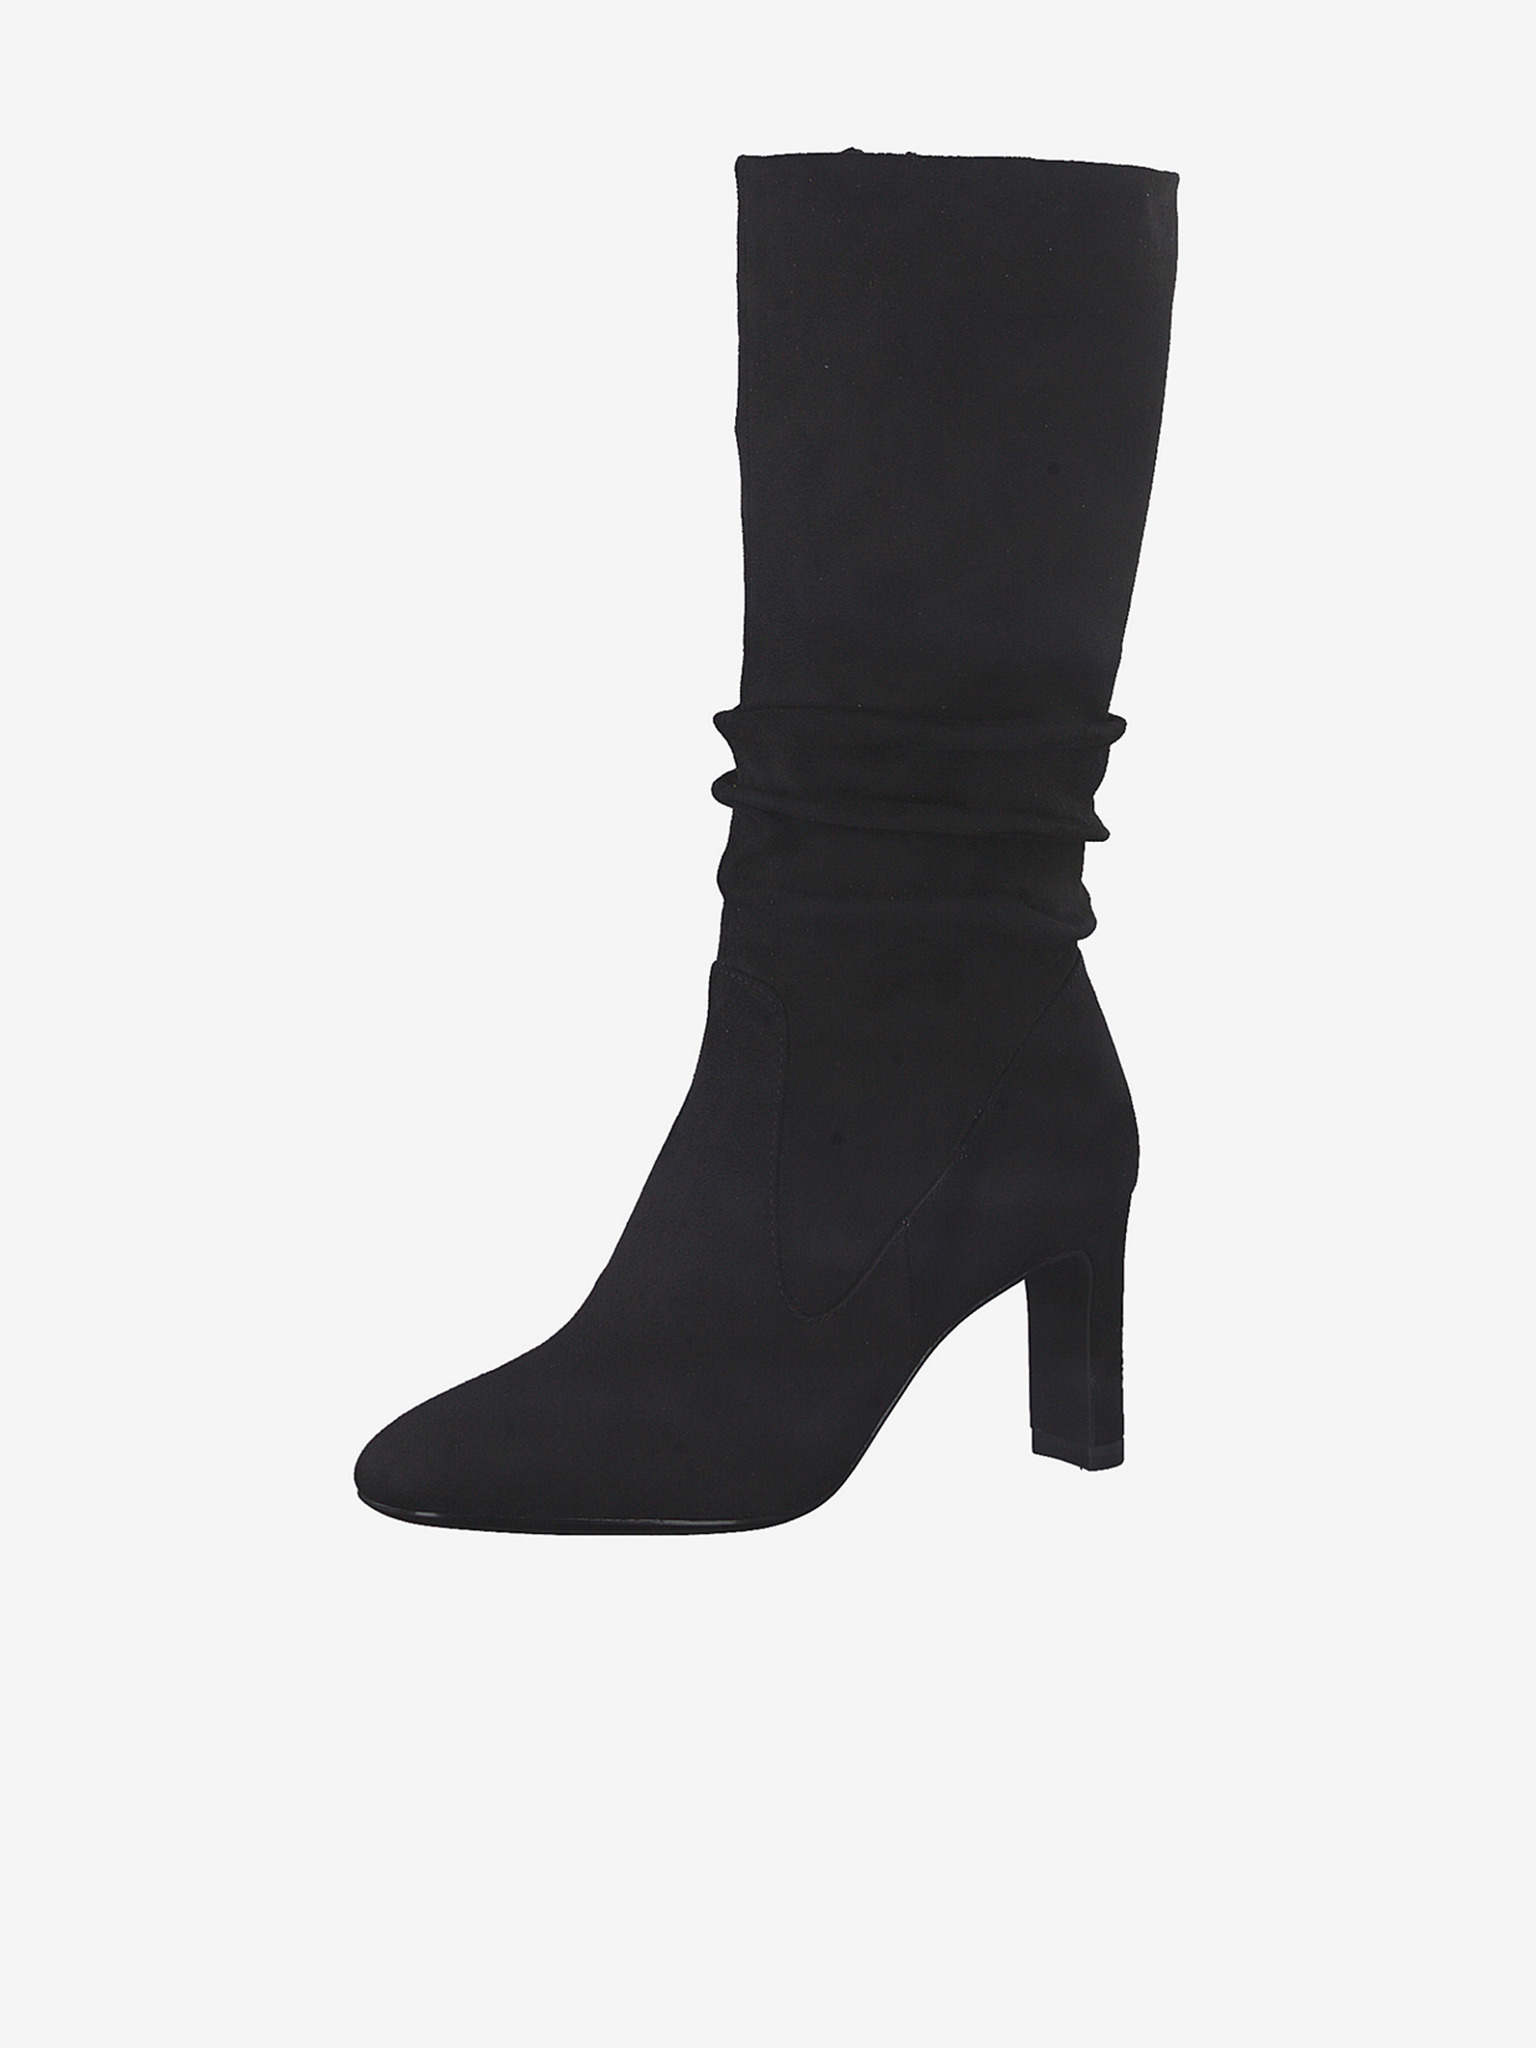 Lycra Knee High Chunky Heel Boots | SHEIN South Africa